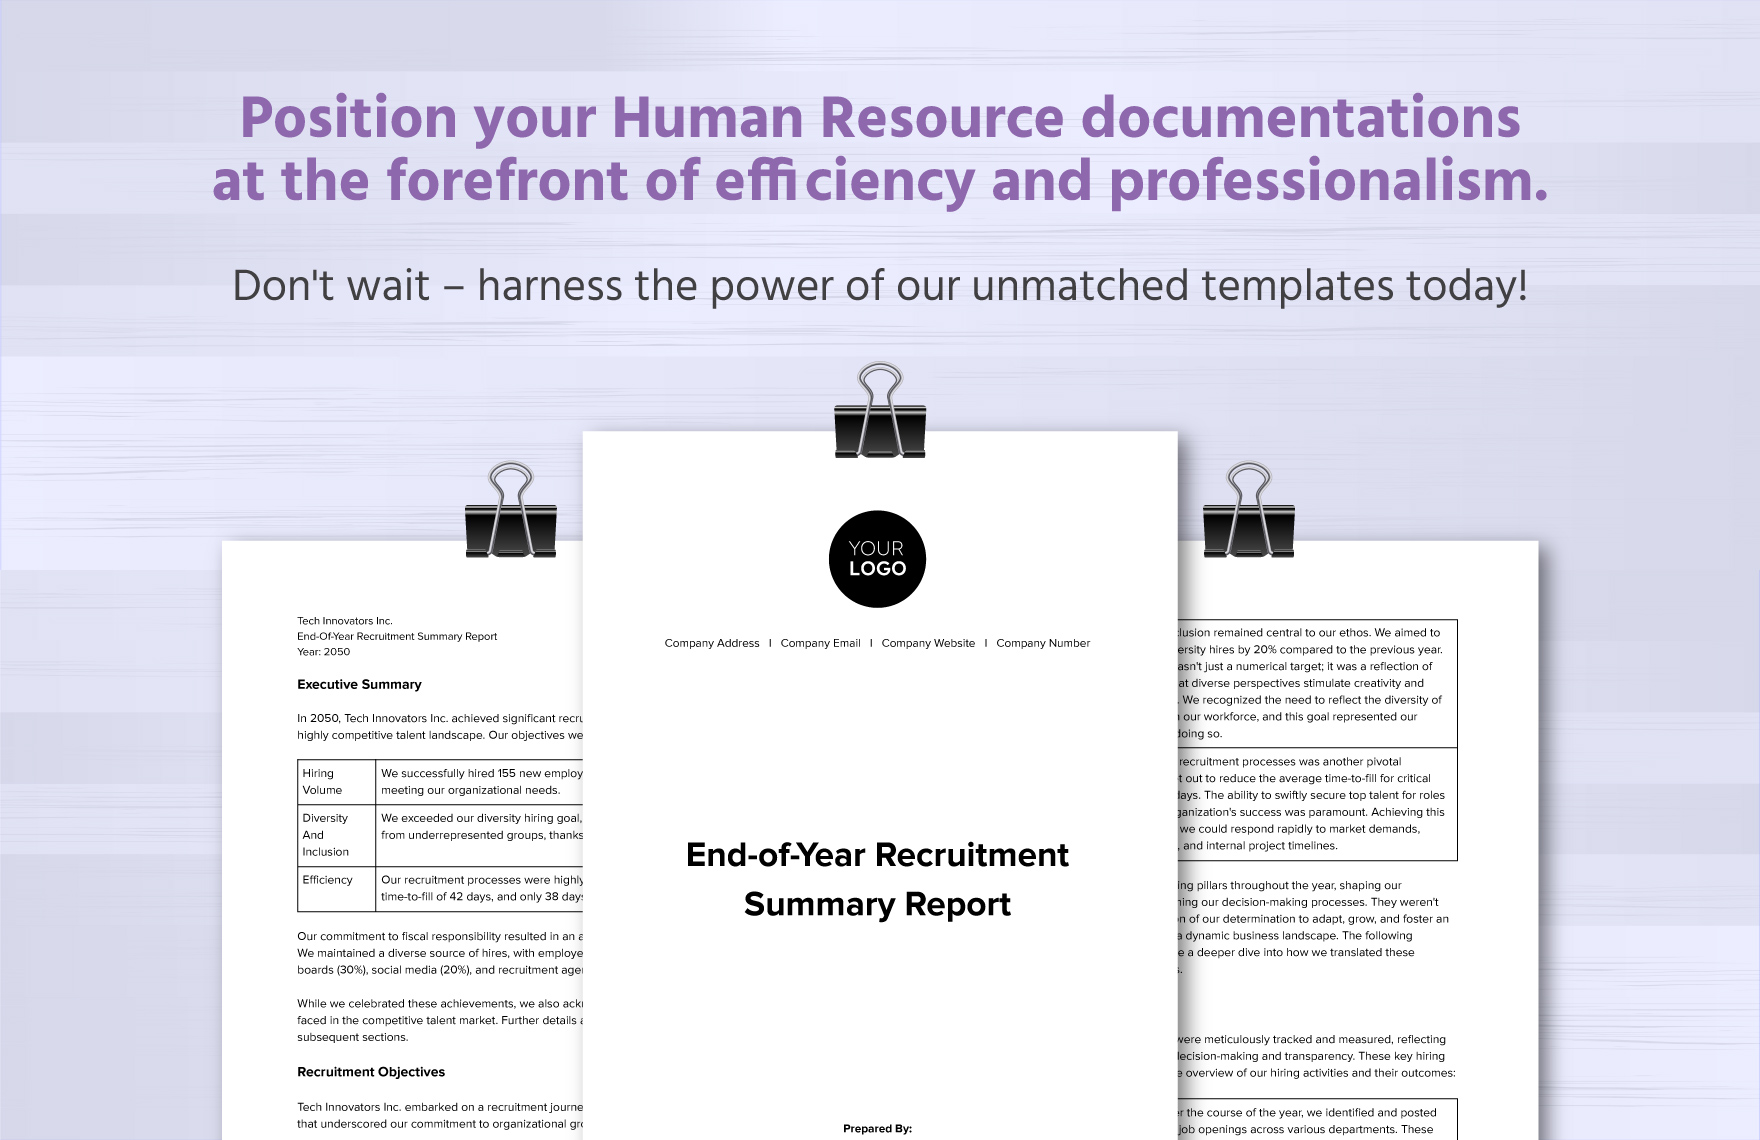 End-of-Year Recruitment Summary Report HR Template